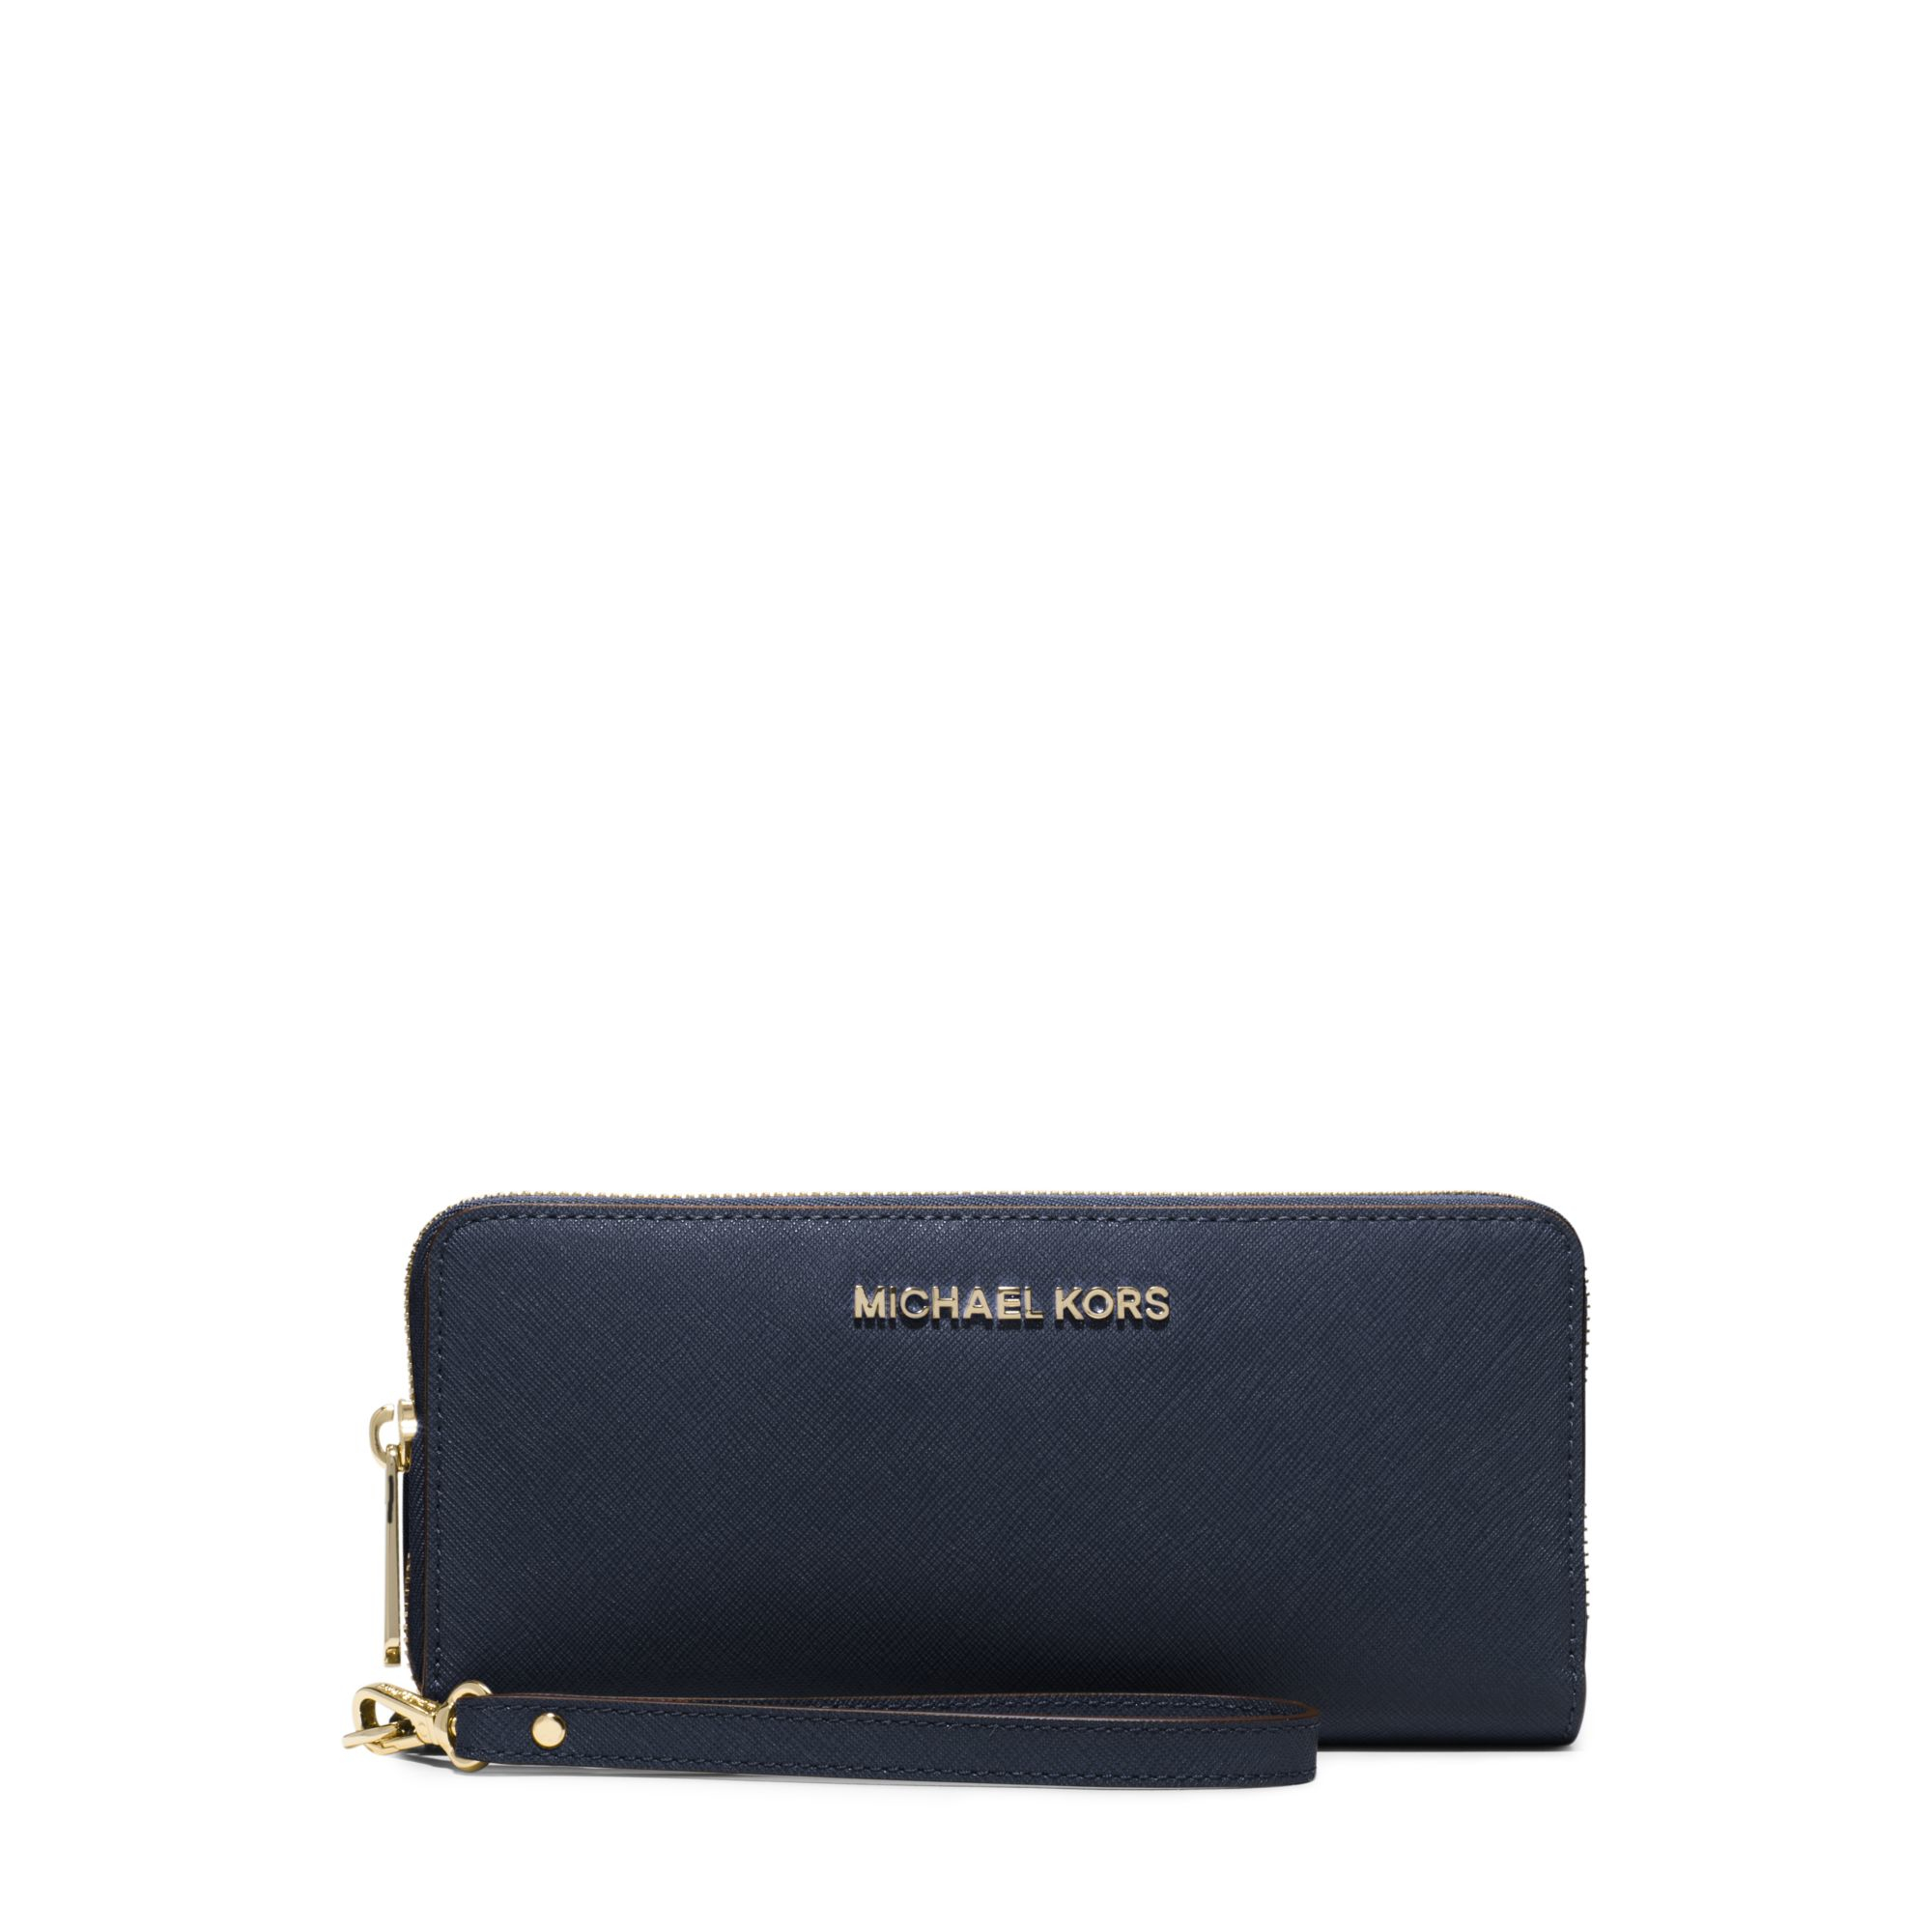 Michael kors Jet Set Travel Leather Continental Wallet in Blue | Lyst